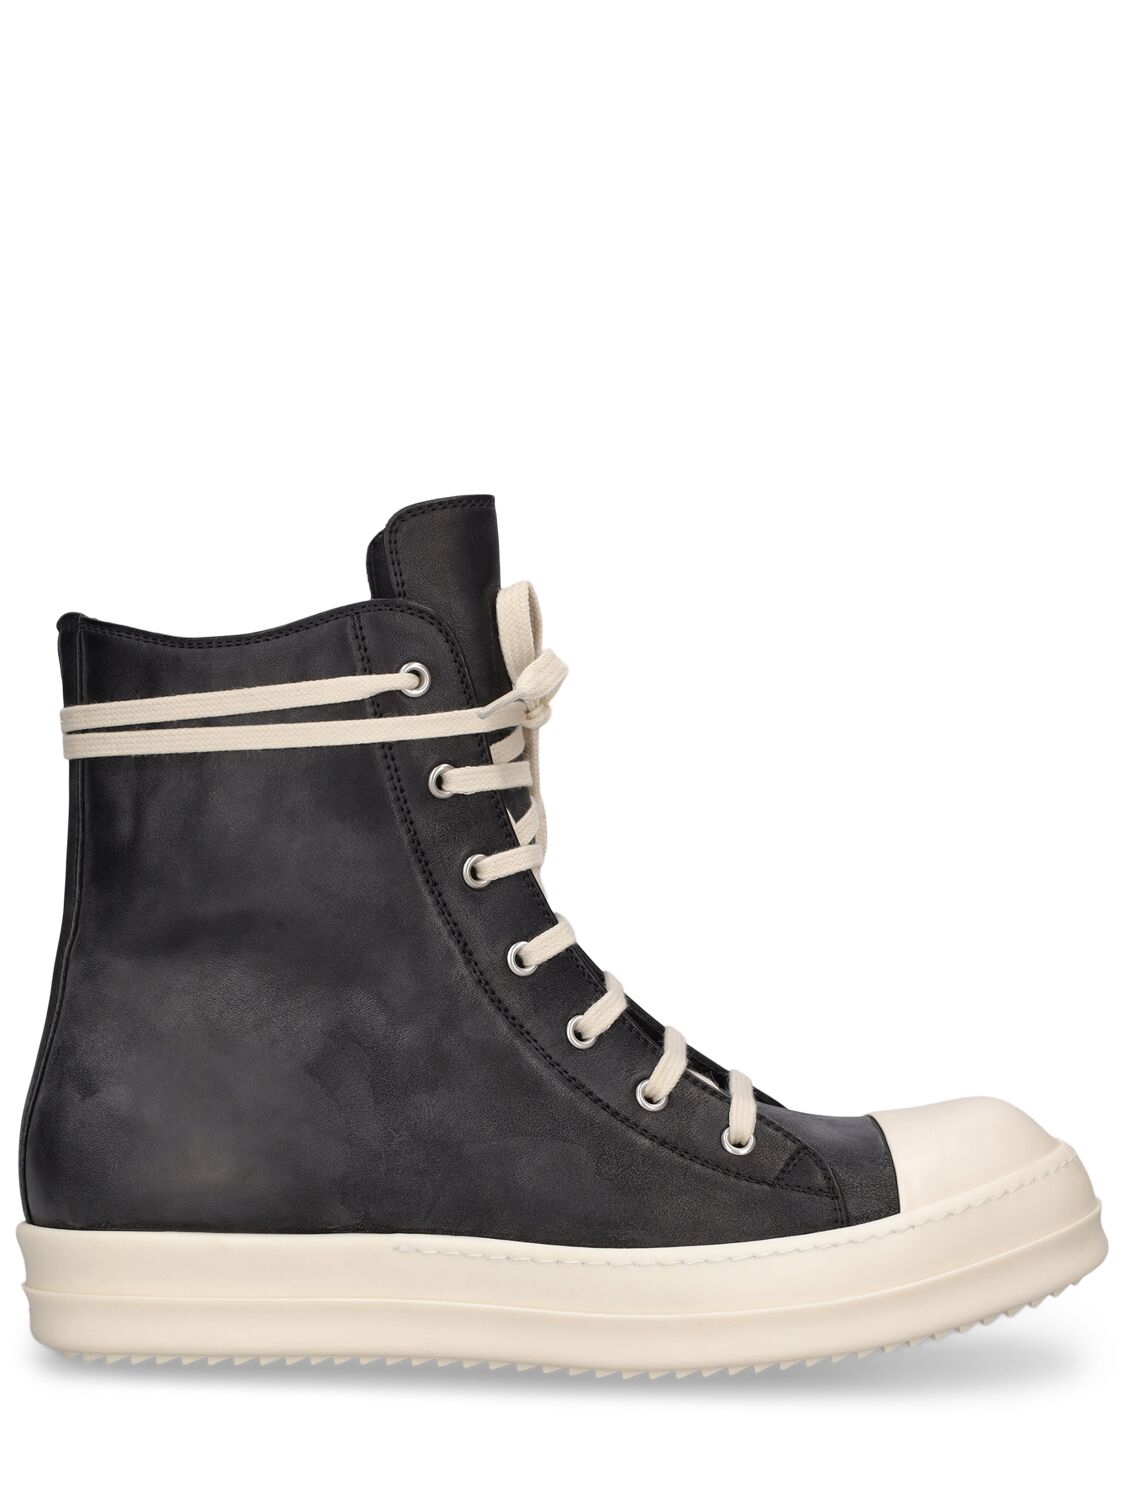 RICK OWENS LEATHER HIGH TOP SNEAKERS